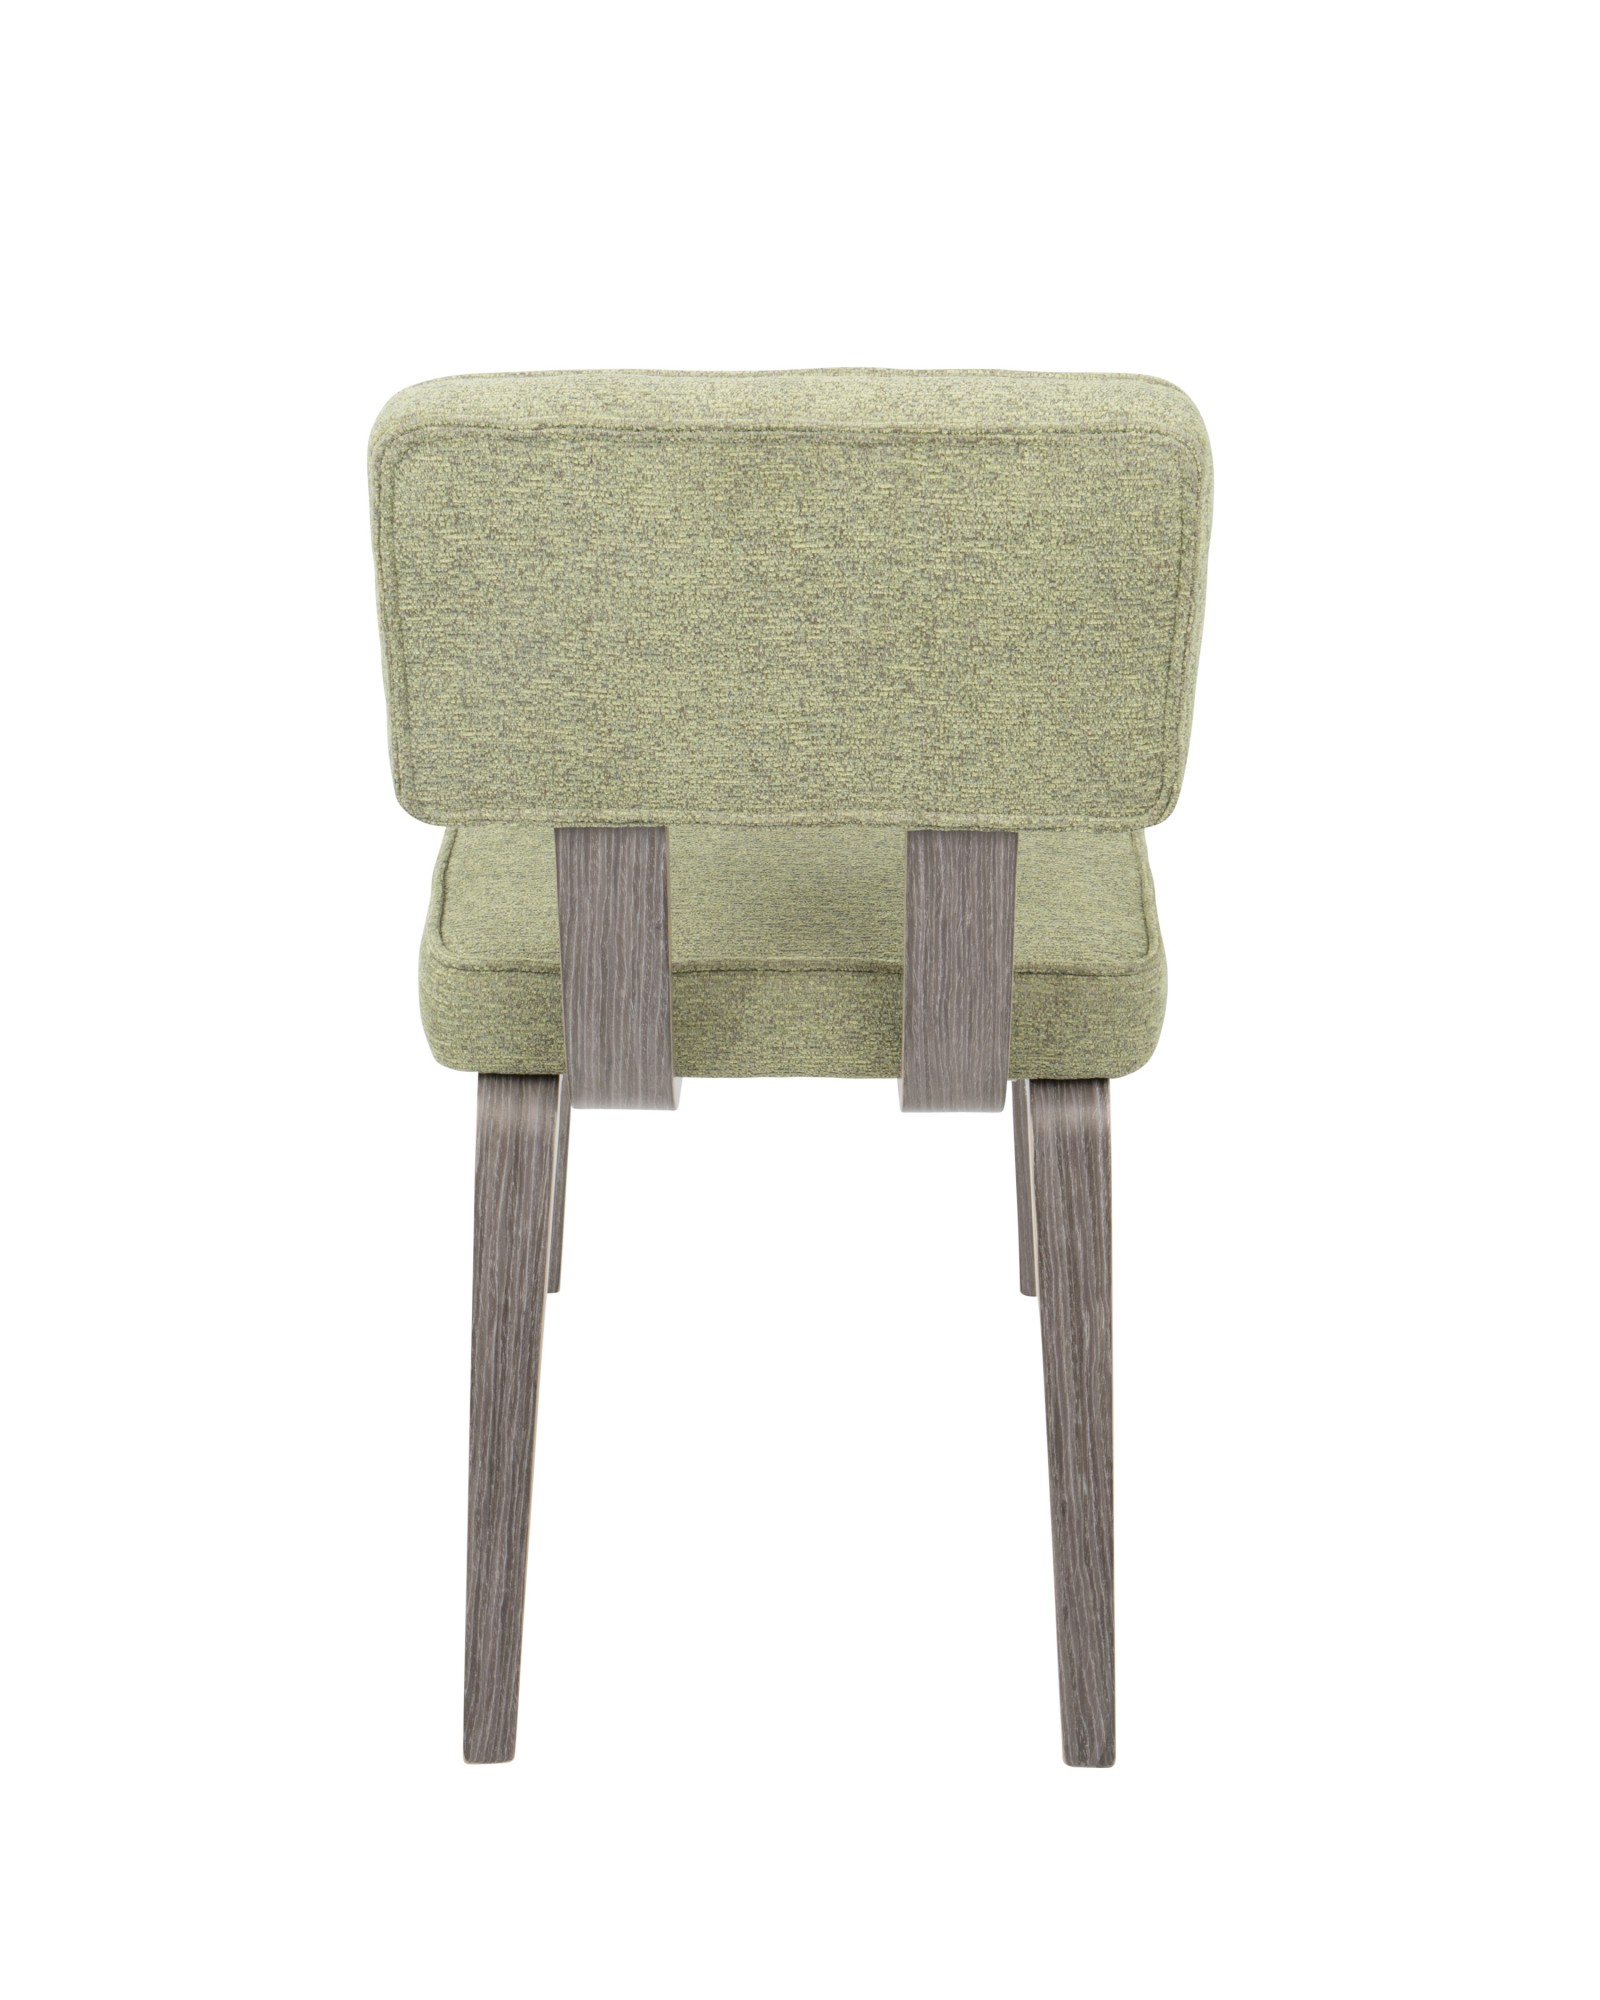 Nunzio Mid-Century Modern Dining Chair in Light Grey Wood and Light Green Fabric - Set of 2